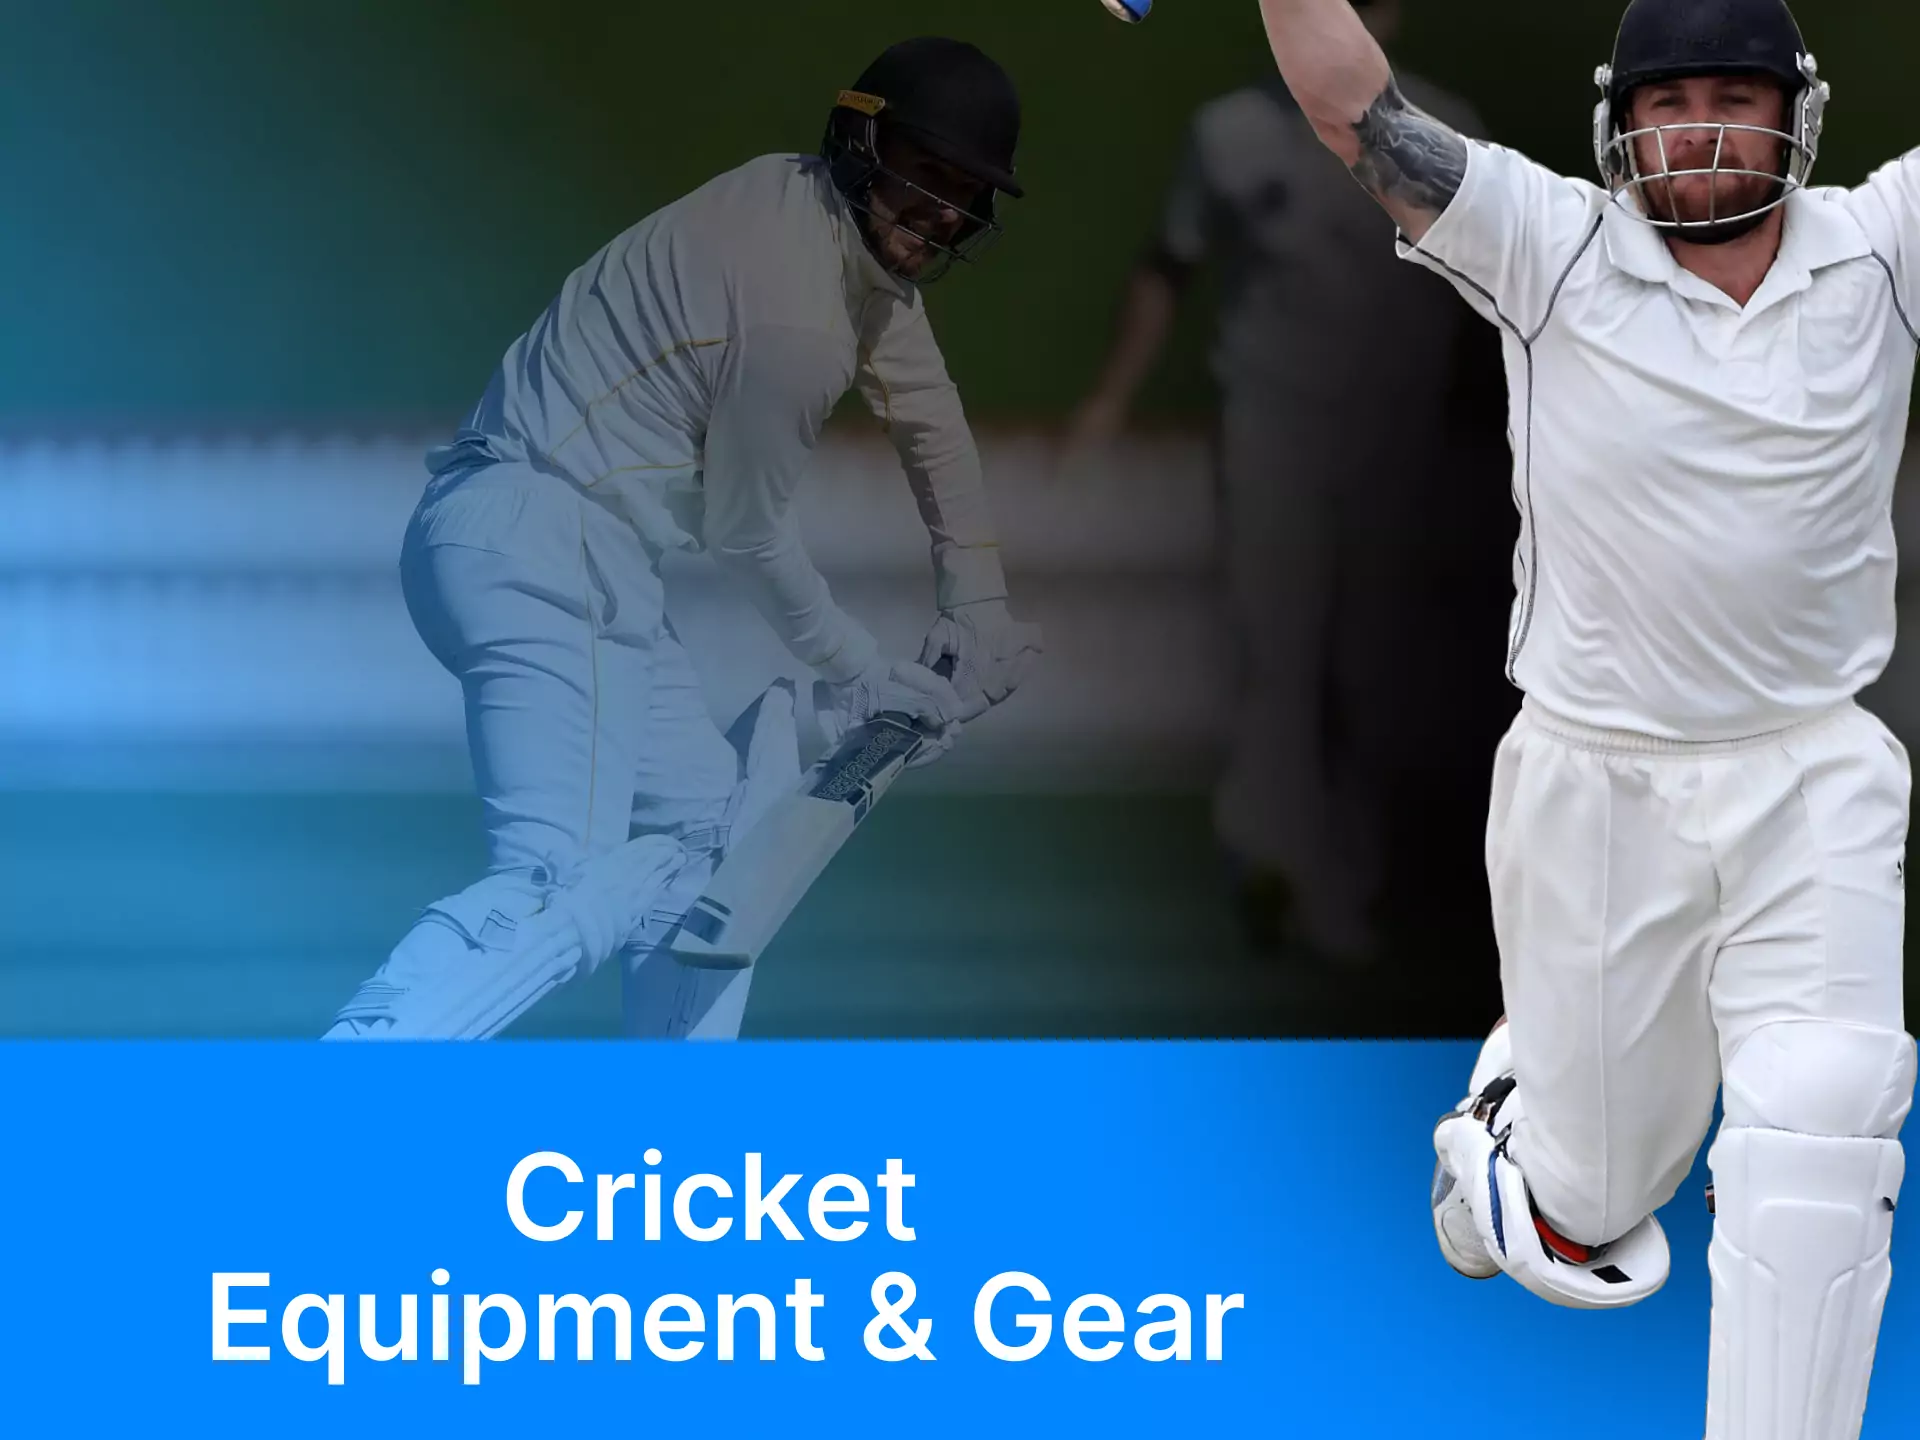 Read what equipment and gear are used in cricket.